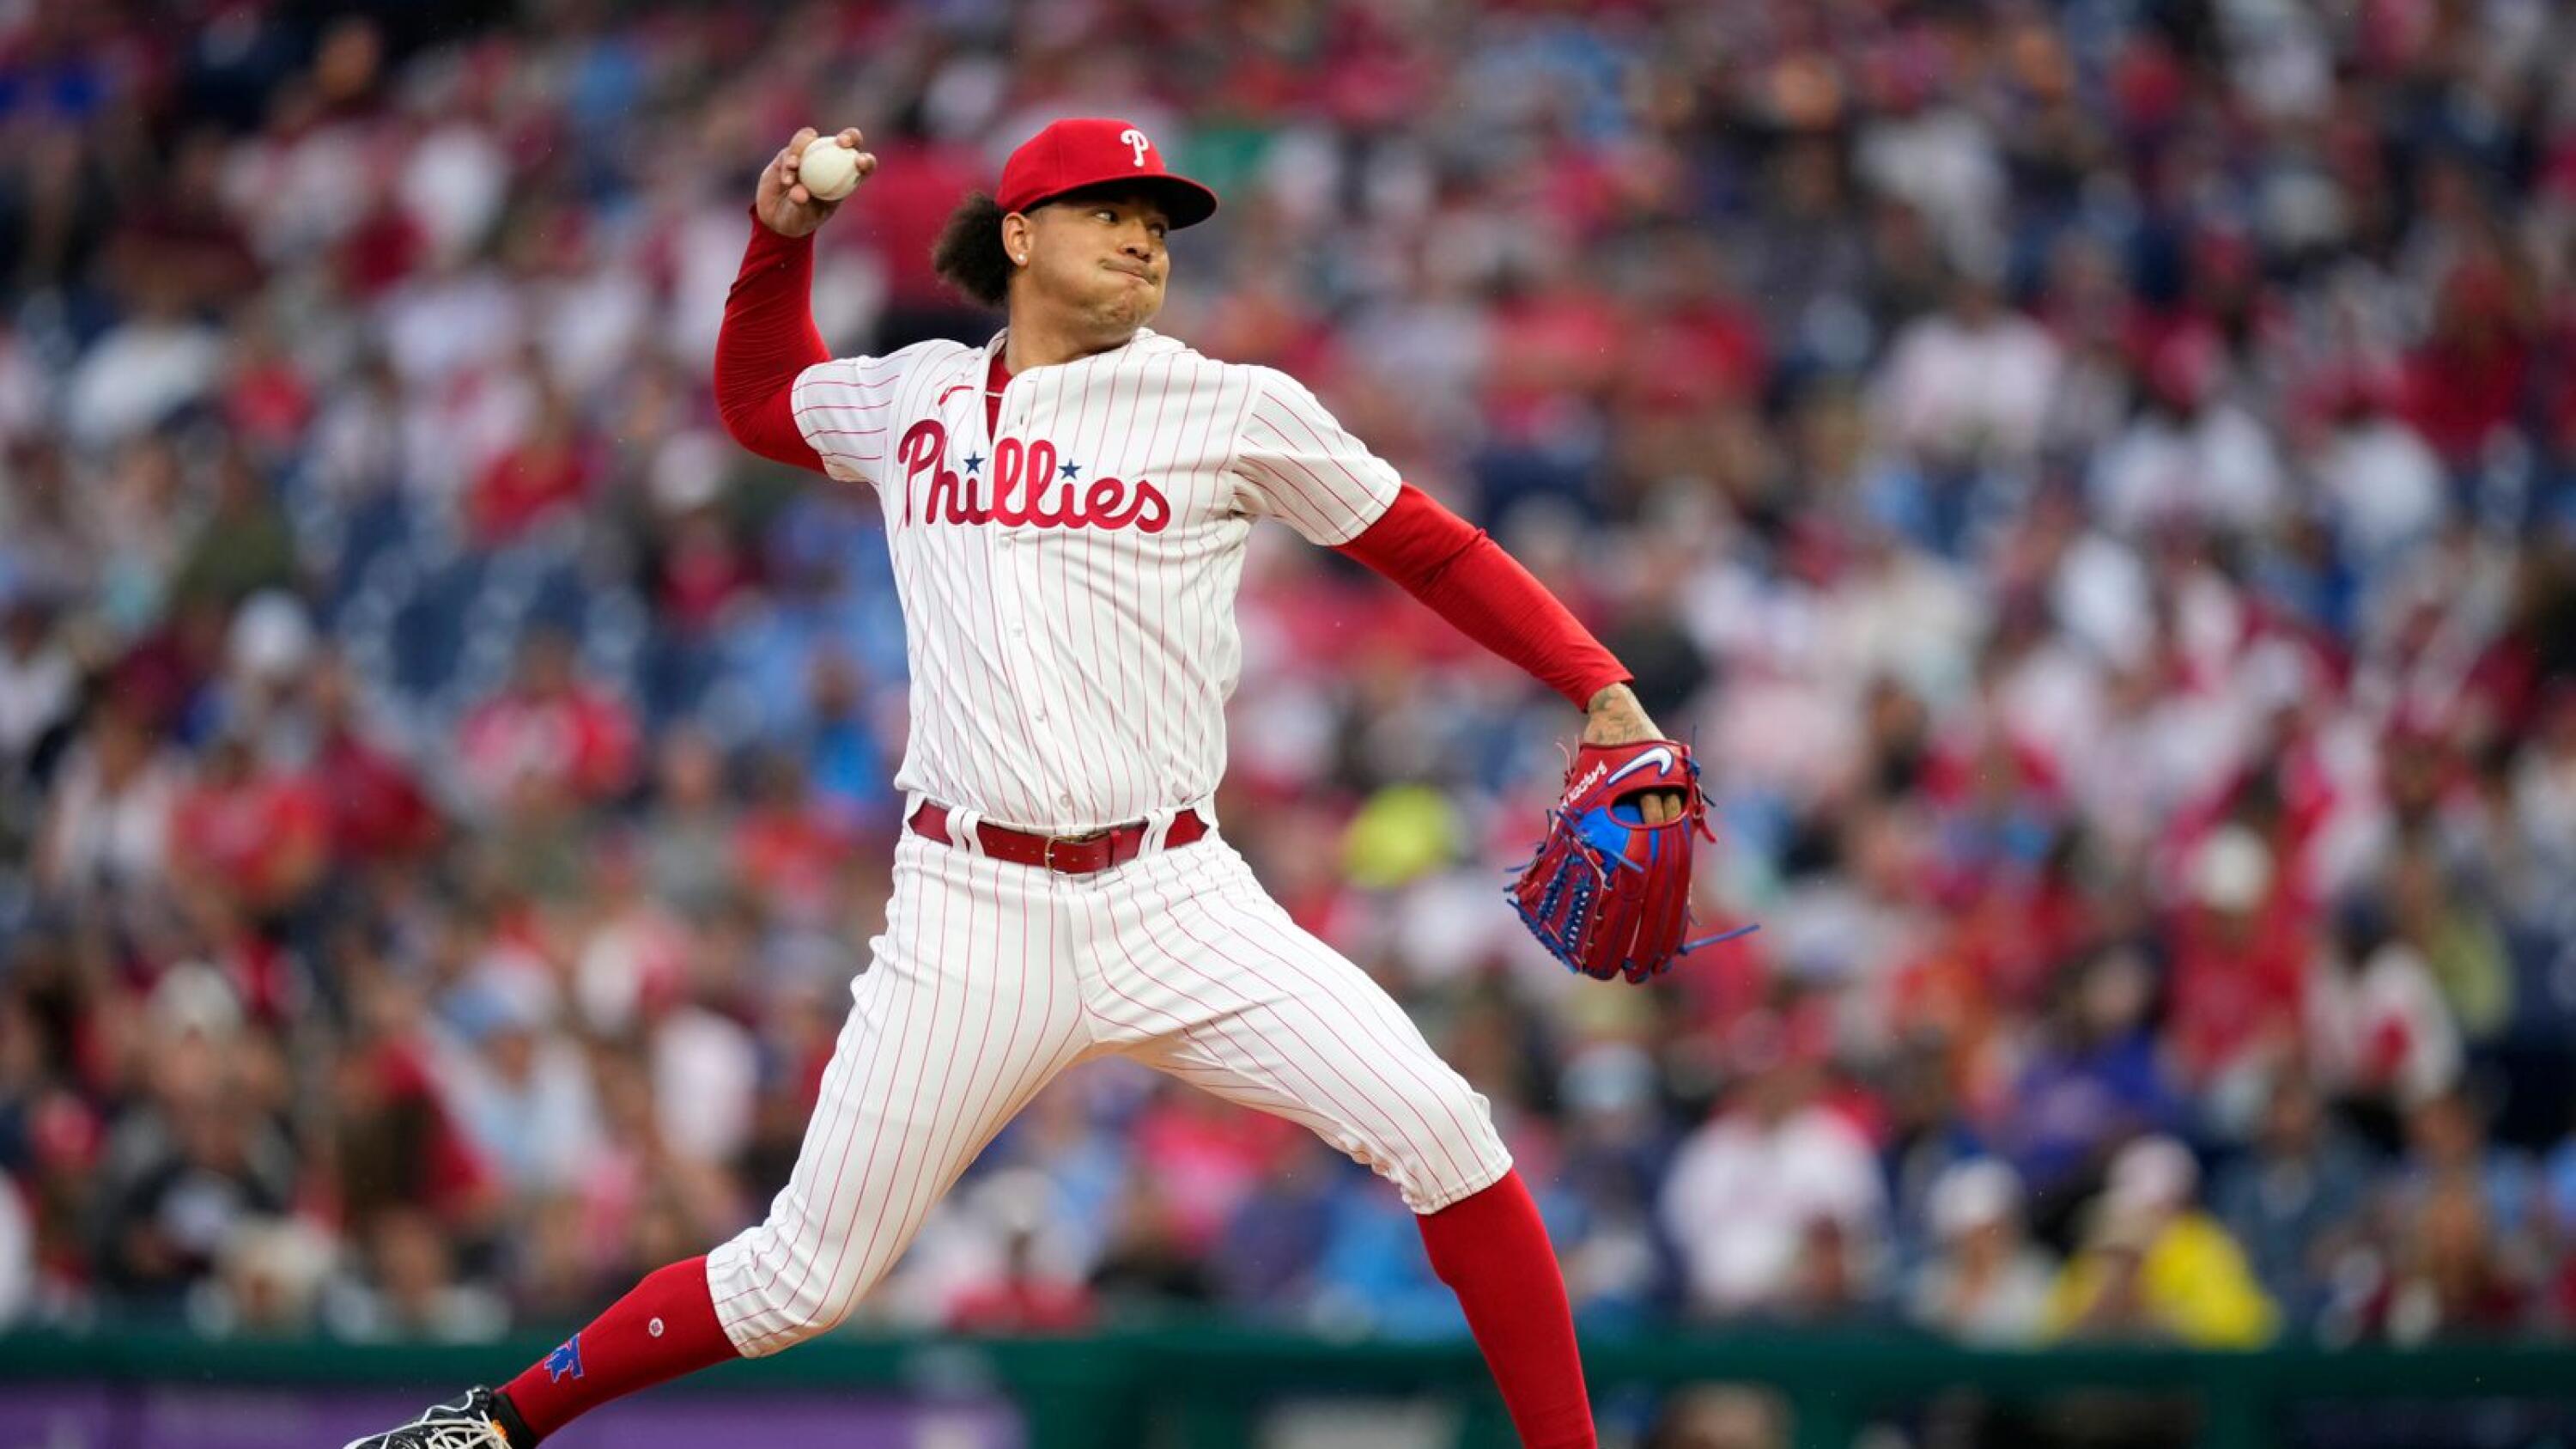 Walker and Turner lead the Phillies past the Mets 5-1